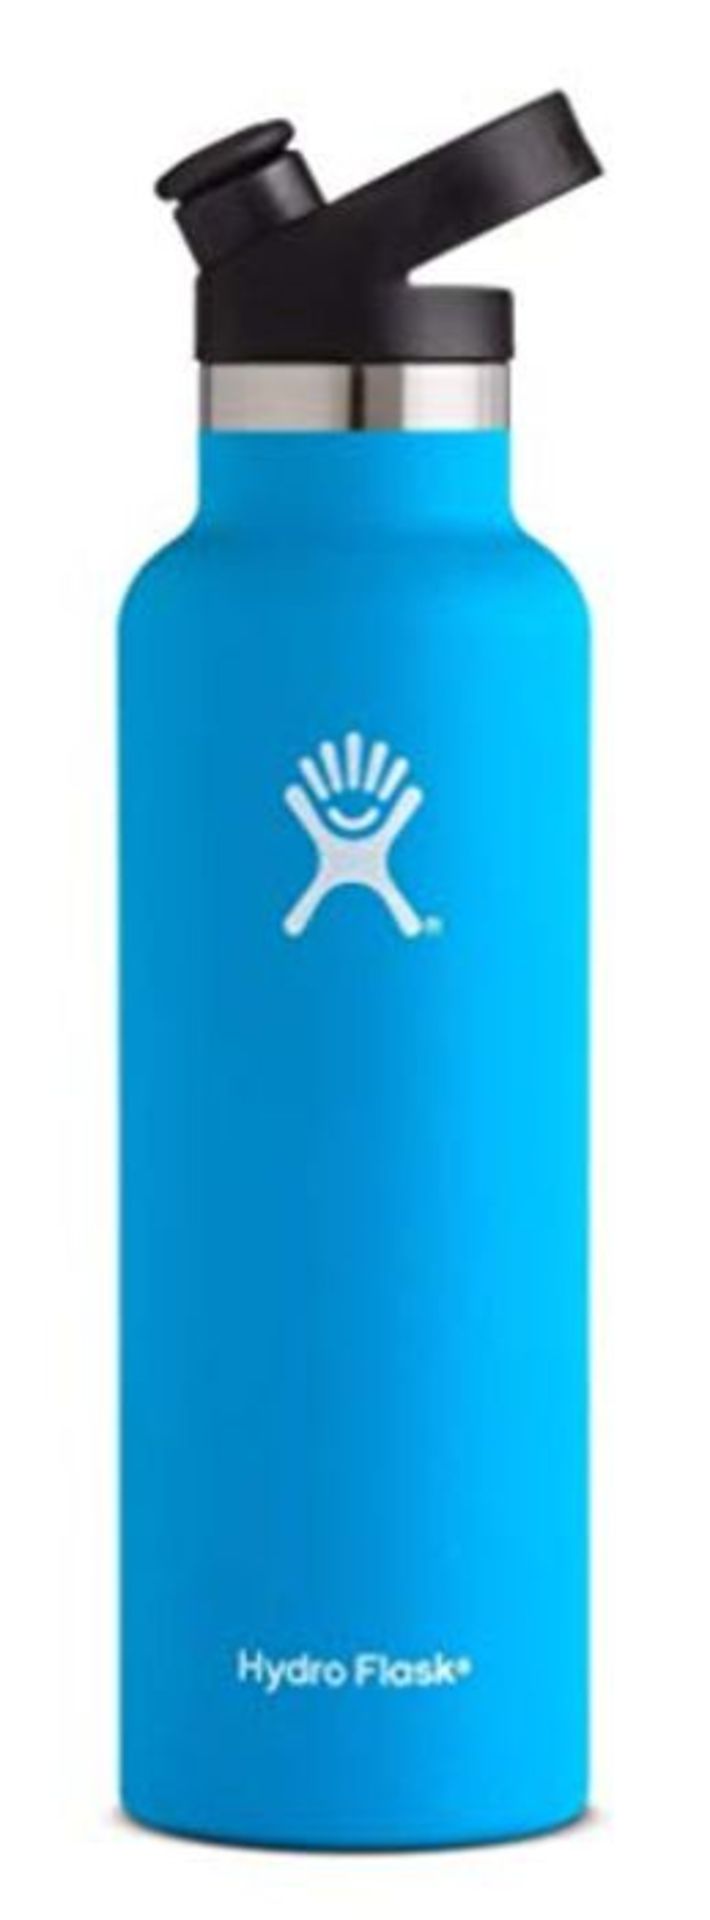 Hydro Flask - Water Bottle 621 ml (21 oz) - Vacuum Insulated Stainless Steel Water Bot